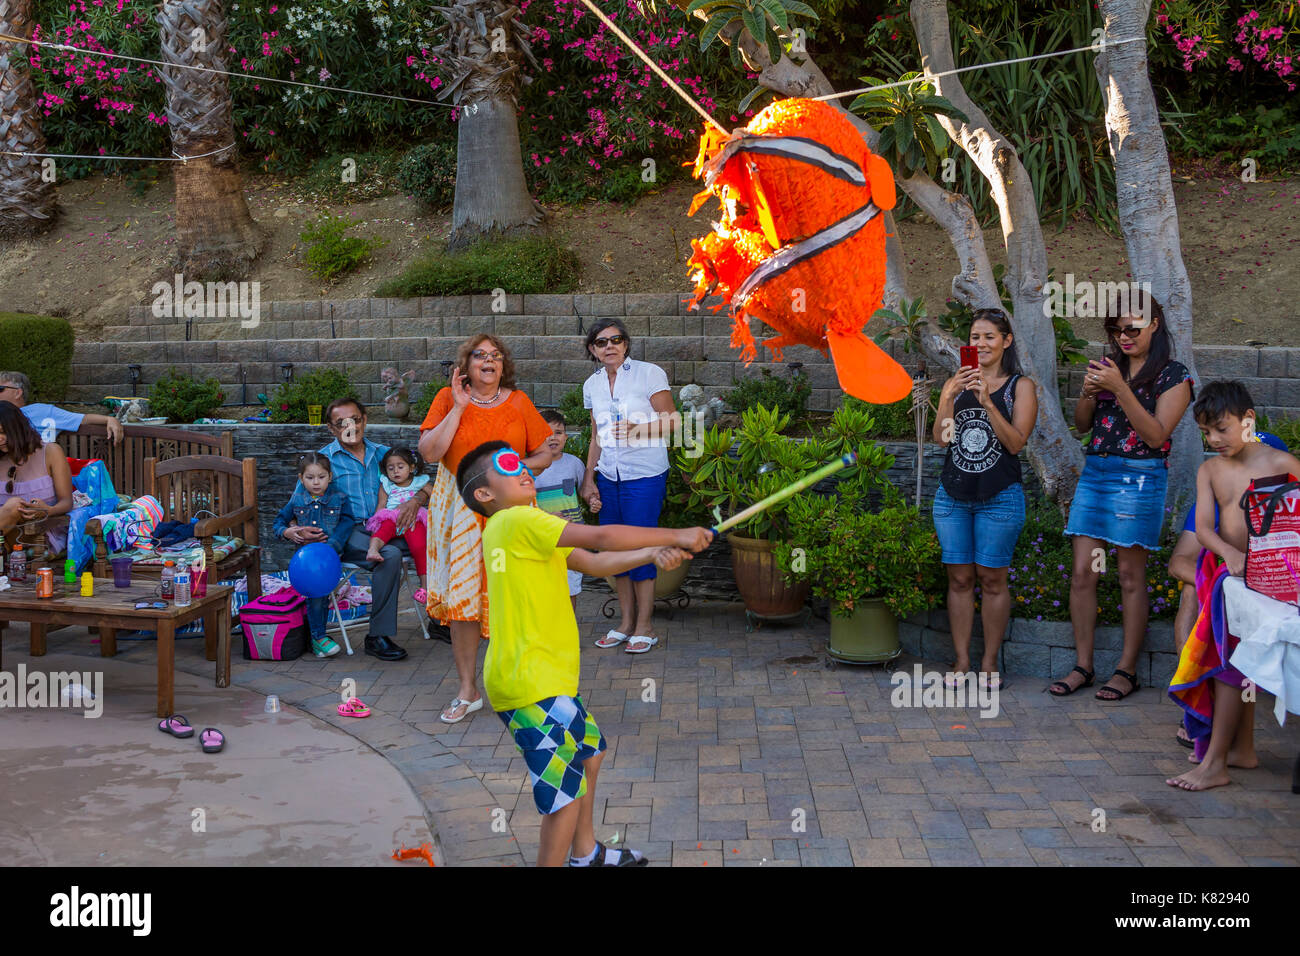 Hispanic boy, hitting a pinata, pinata filled with candy sweets and toys, birthday party, Castro Valley, Alameda County, California, United States Stock Photo